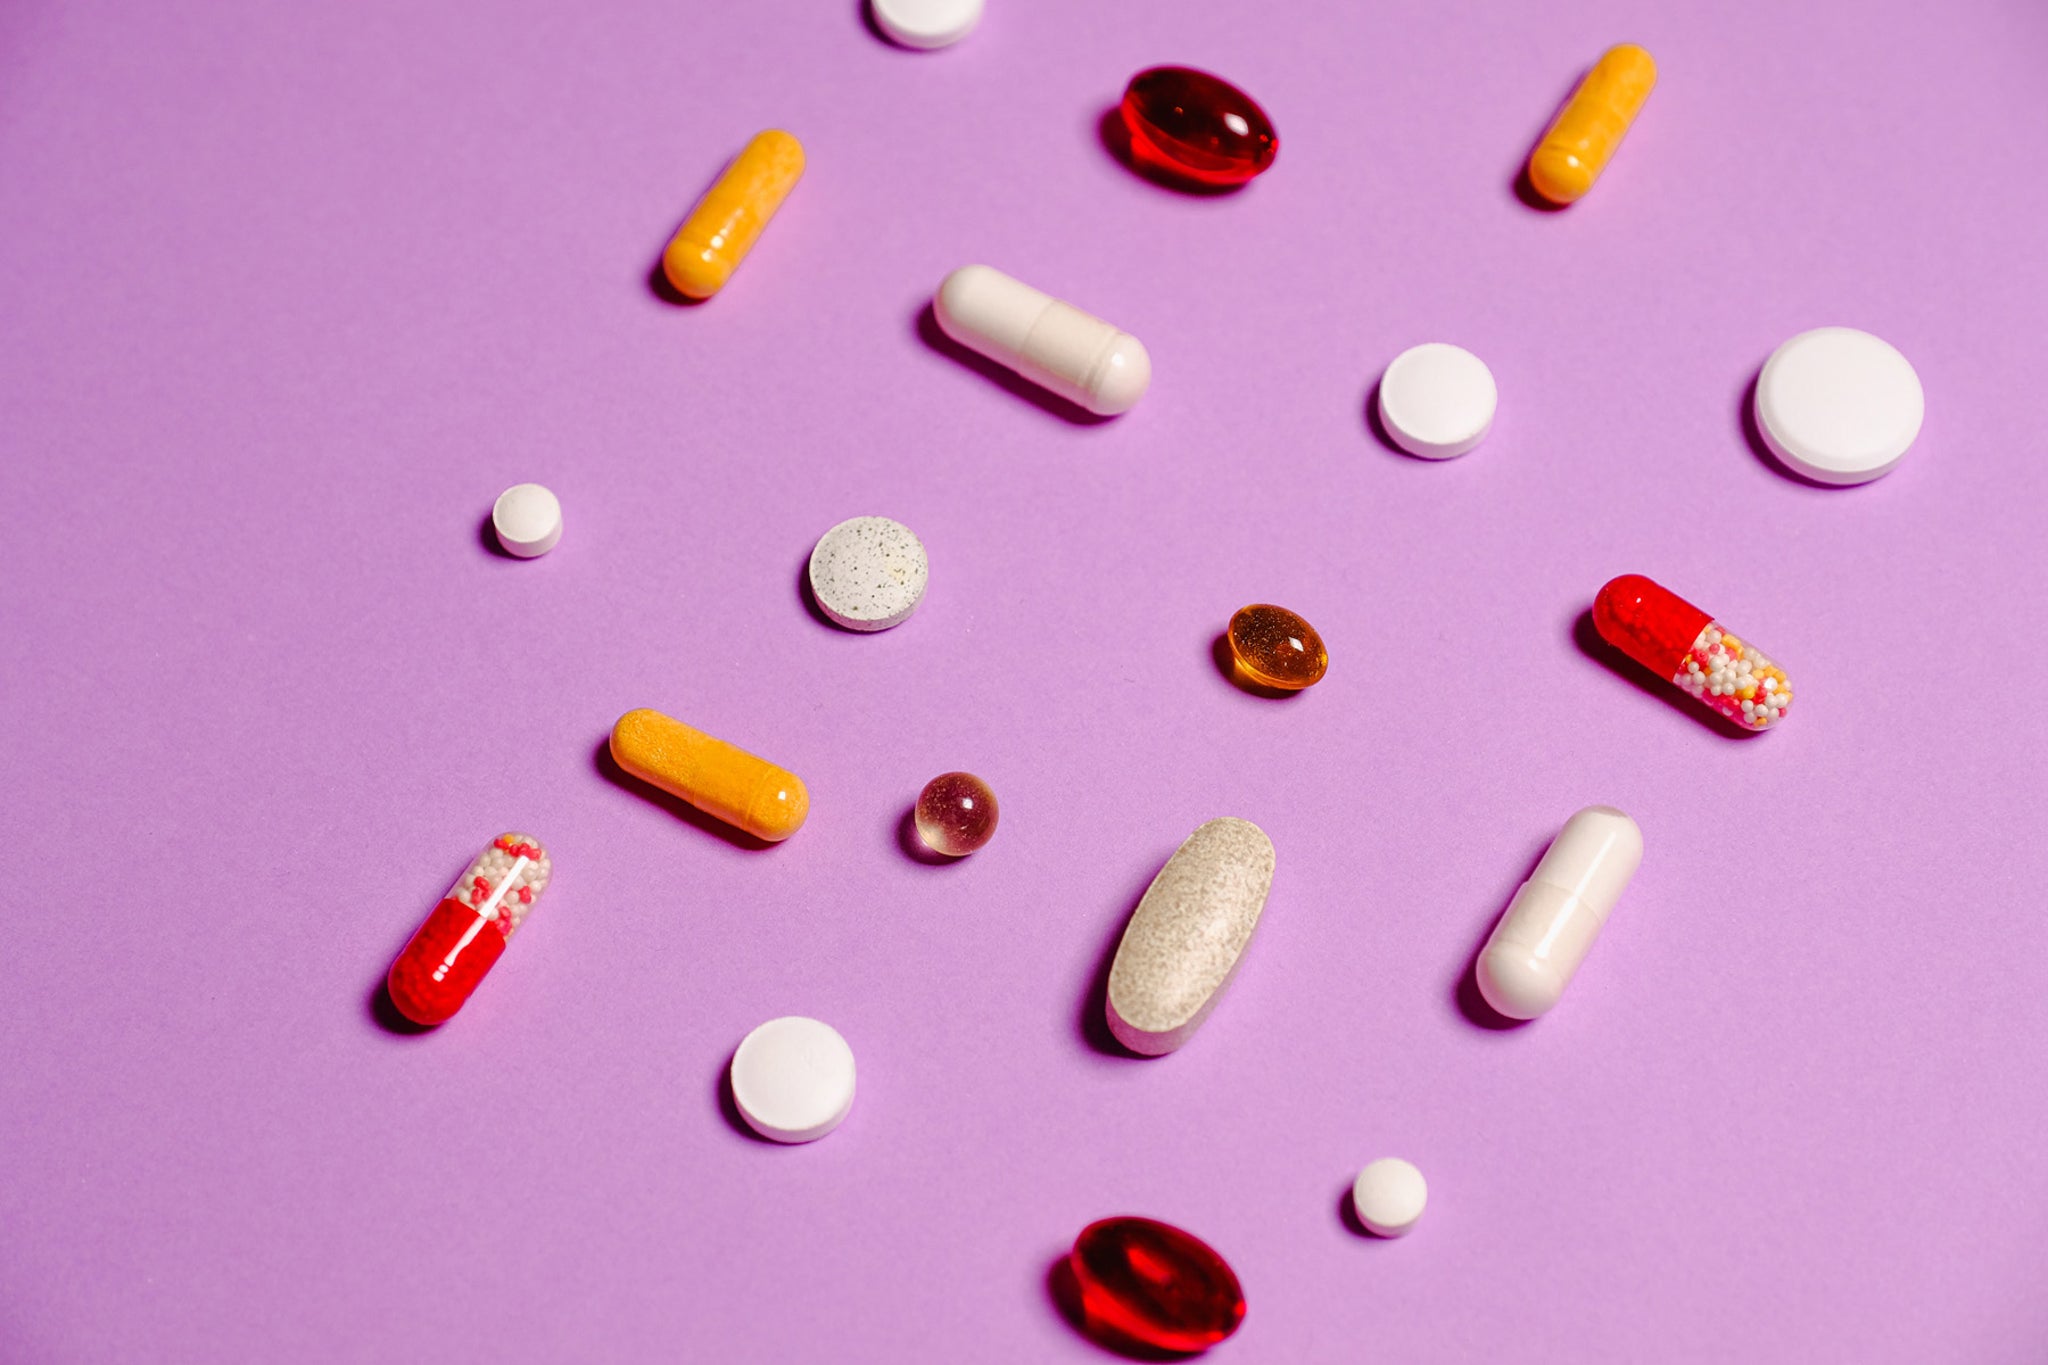 assorted pills and capsules on a pink background